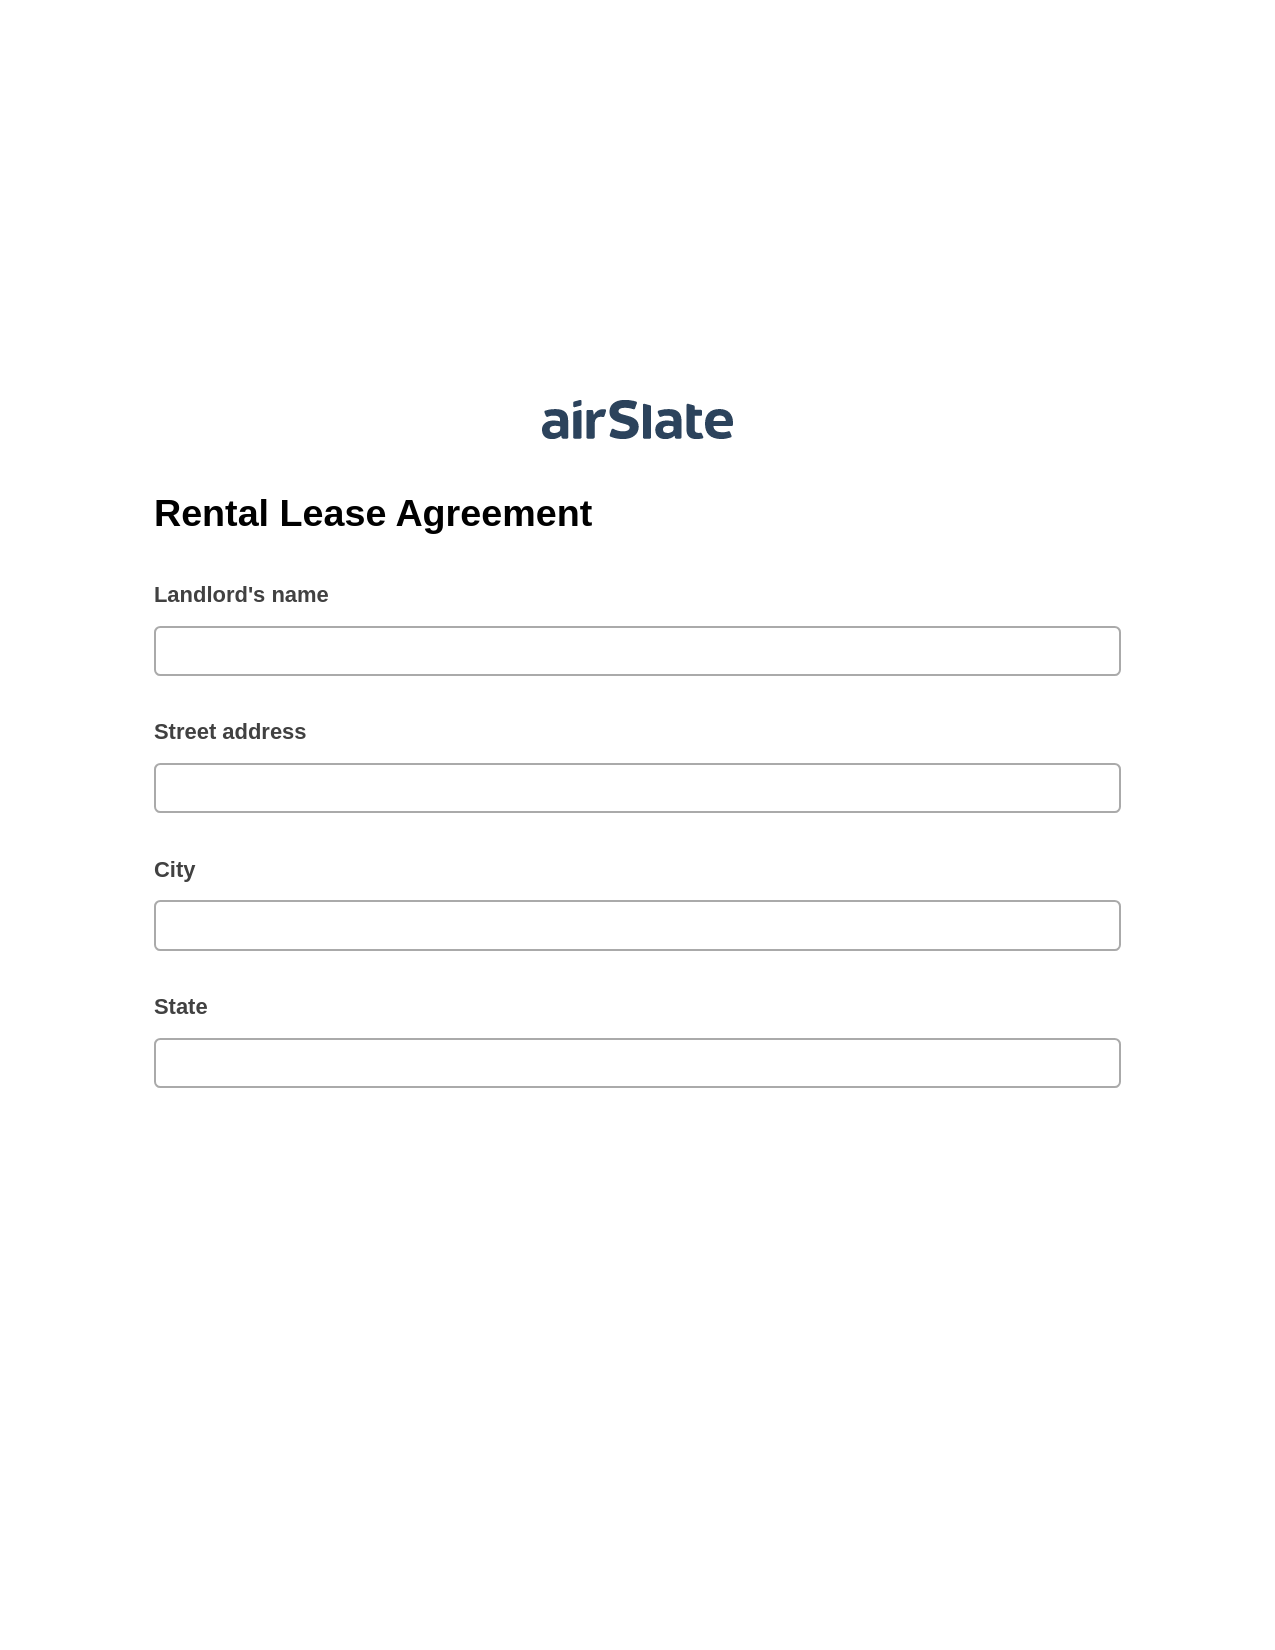 Multirole Rental Lease Agreement Pre-fill Document Bot, Update NetSuite Records Bot, Archive to SharePoint Folder Bot